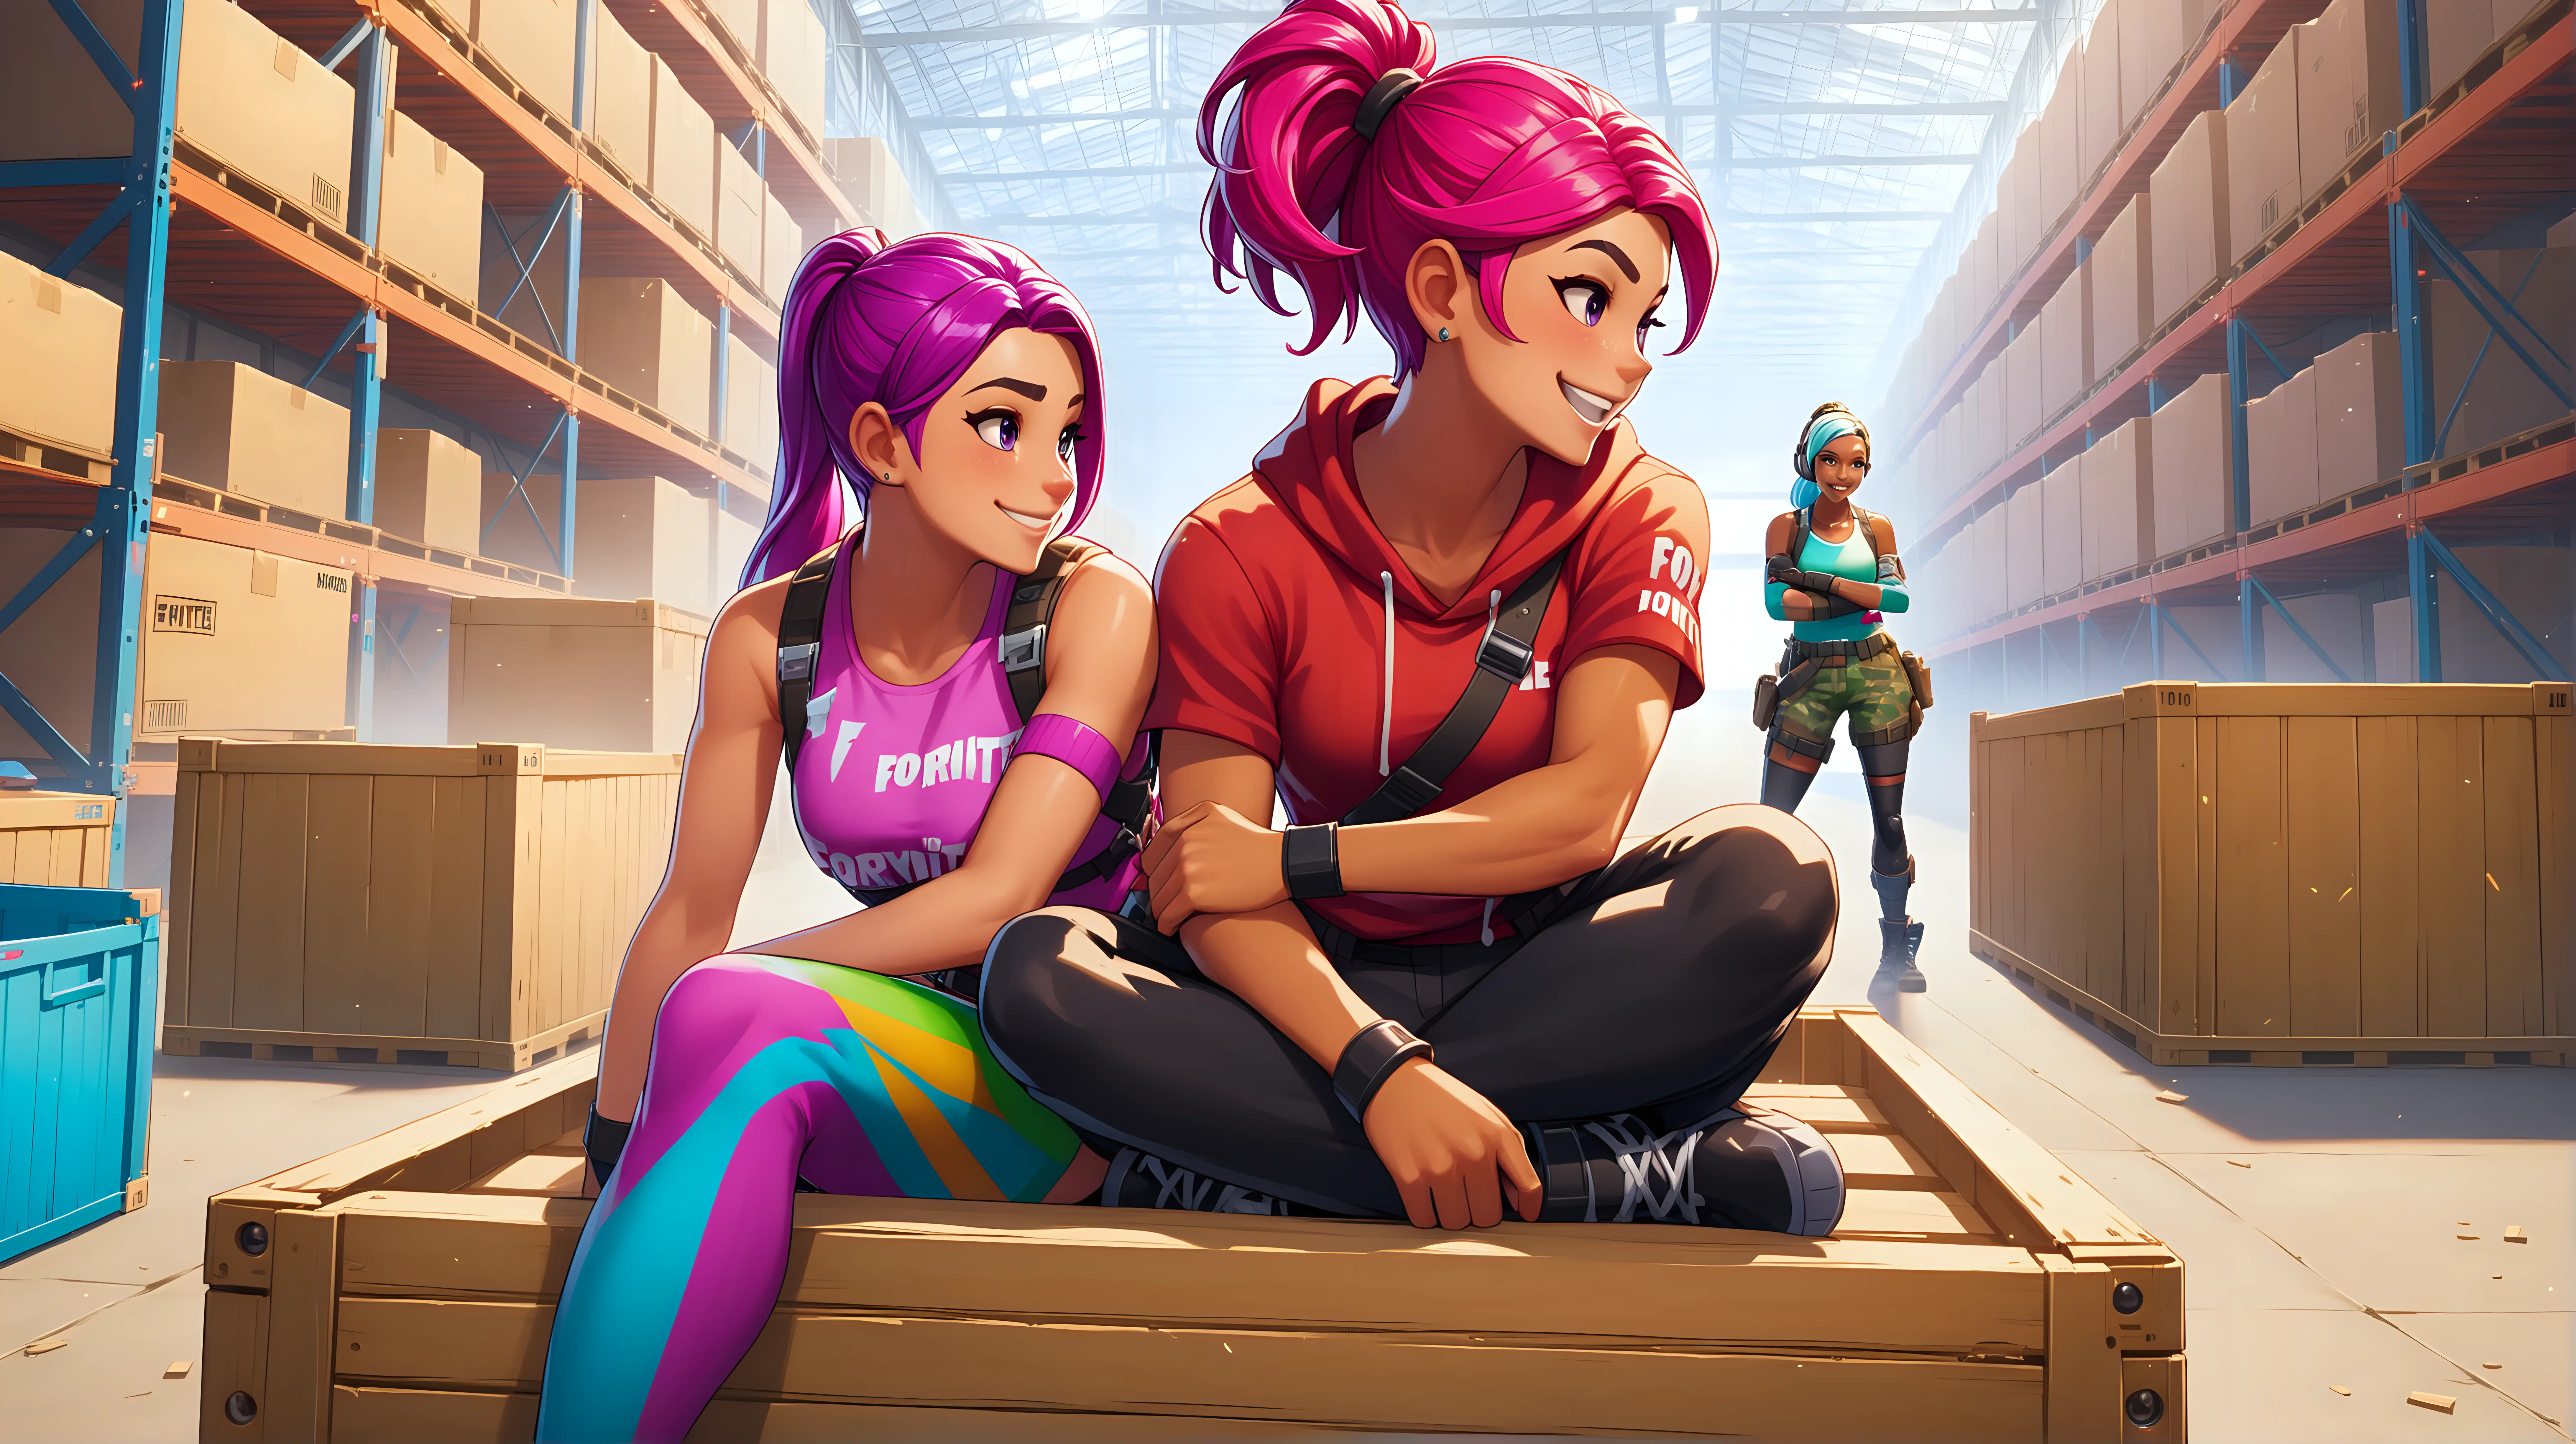 There are two colorful woman and man Fortnite characters,
the location is inside a warehouse,
they are sitting on a crate,
they are smiling,
there is fighting in the background,
Caucasian